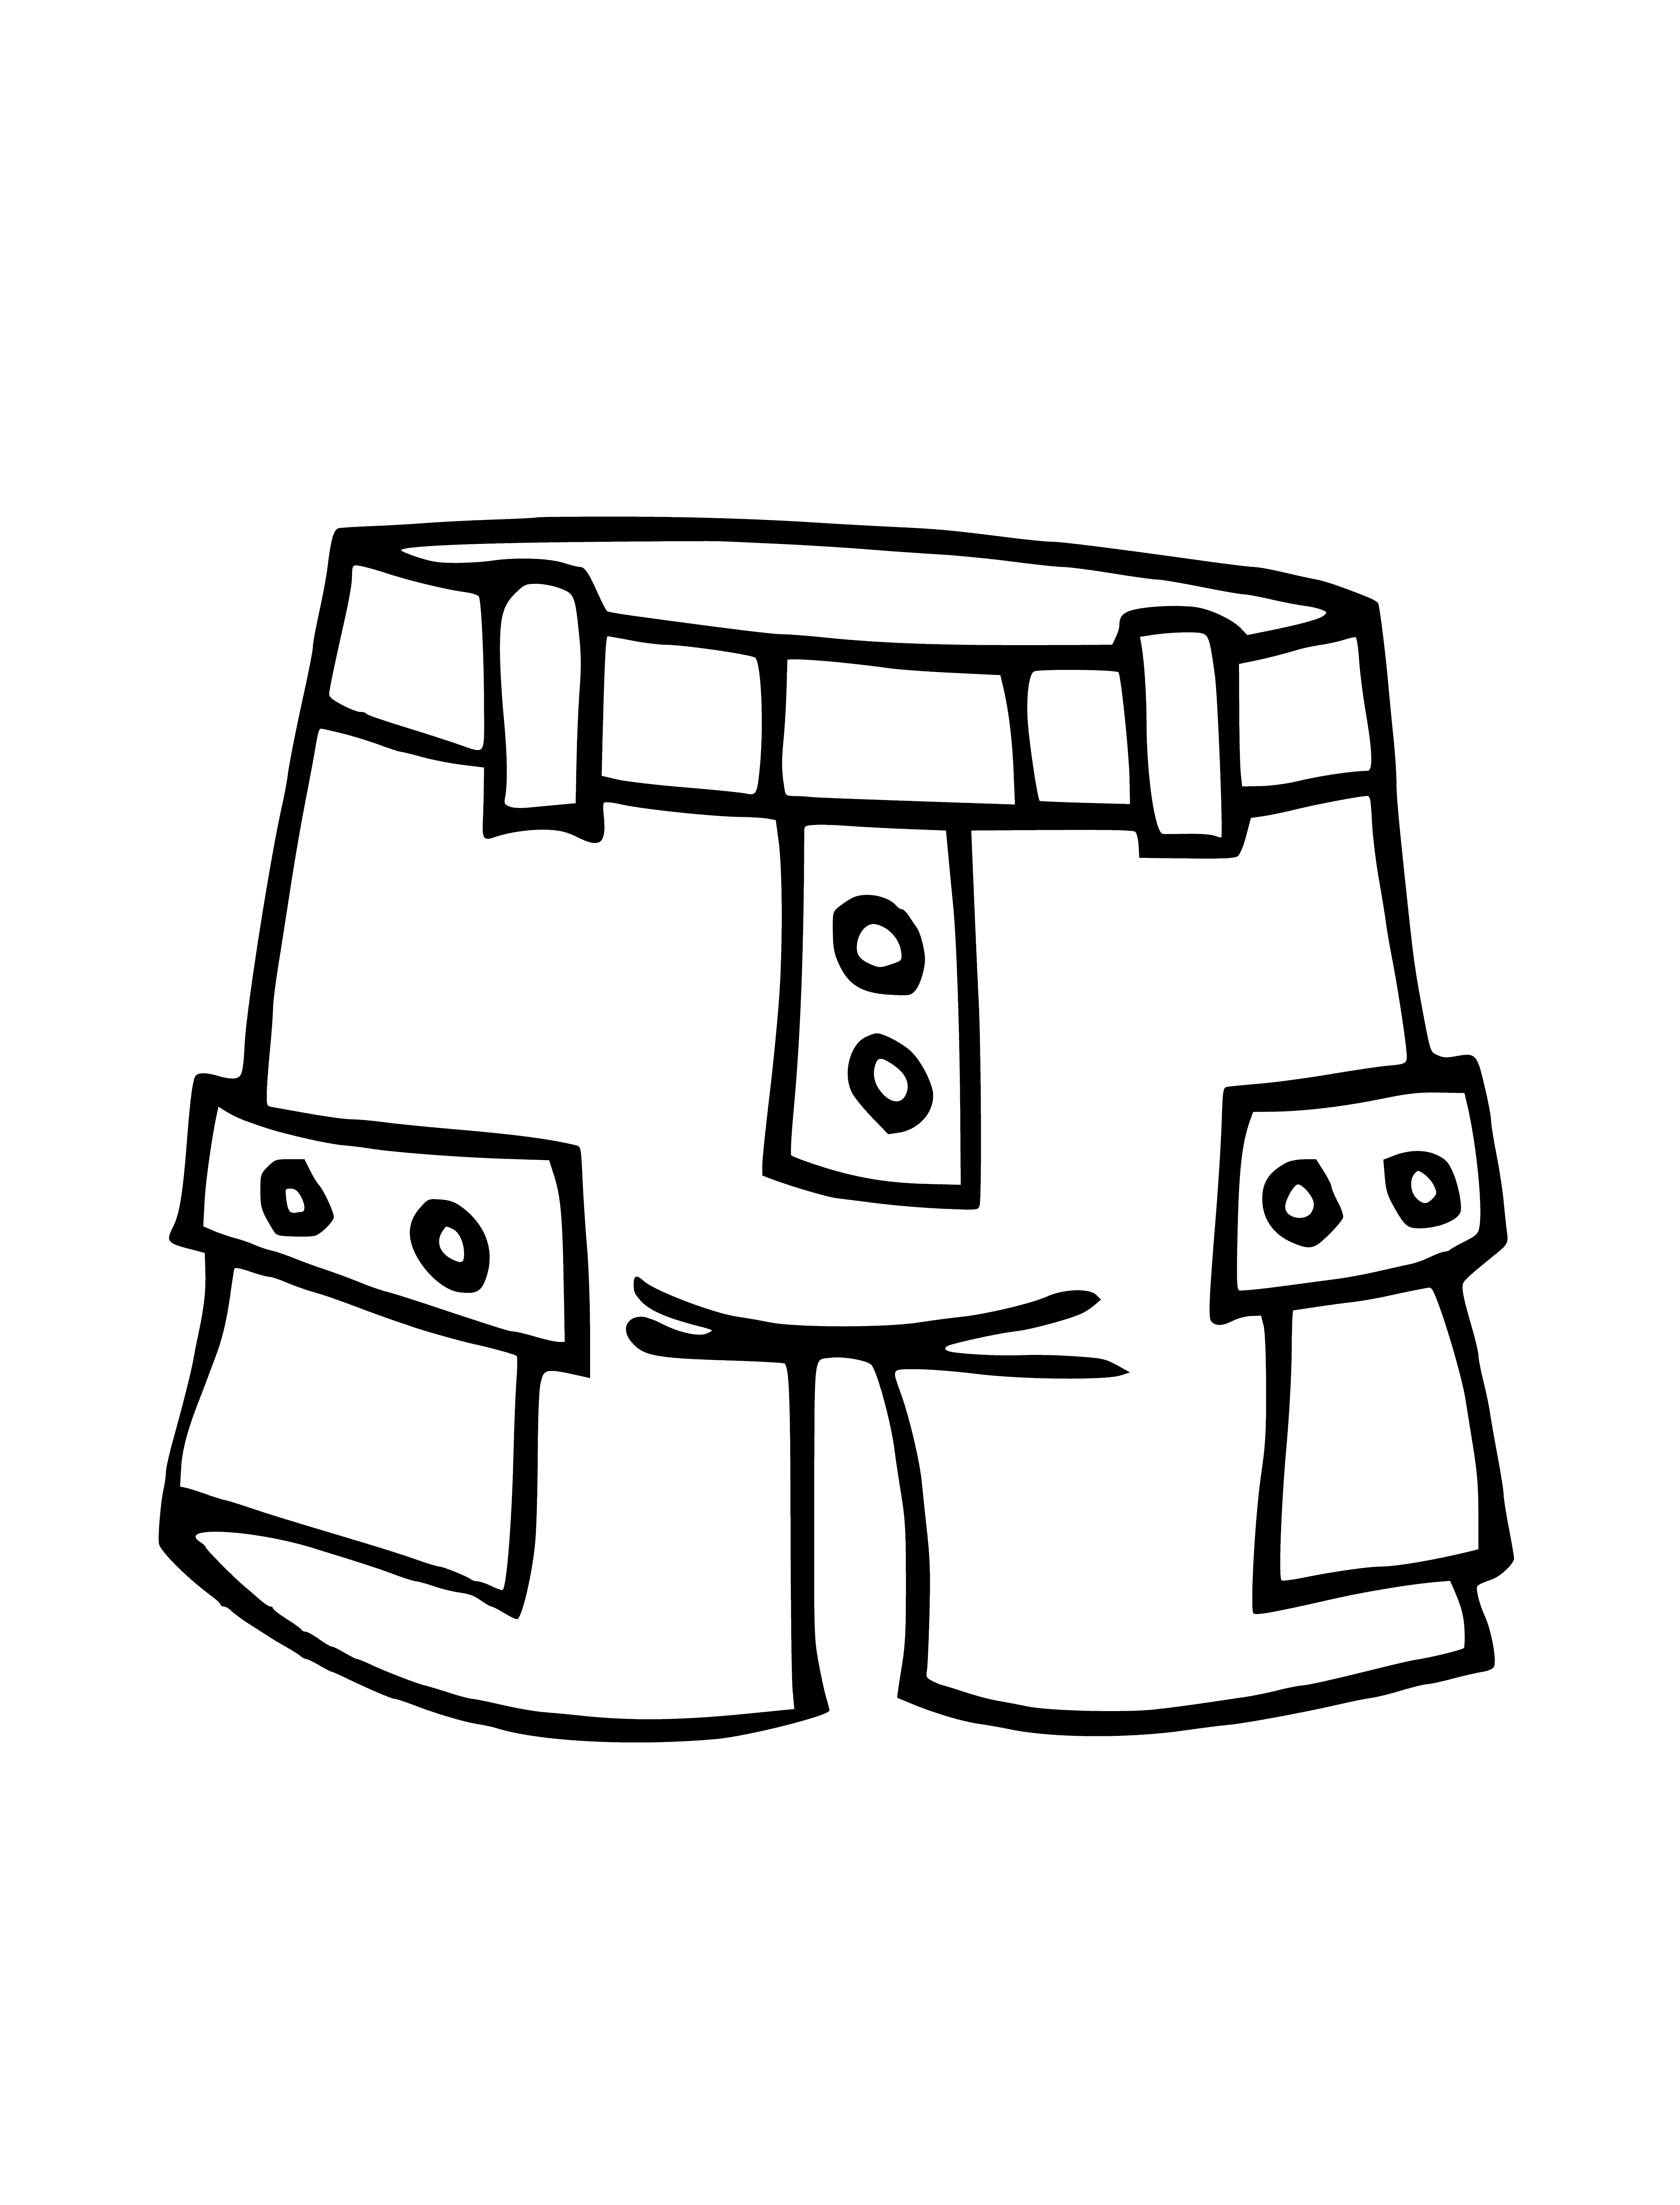 coloring page: Three pairs of shorts: two plaid, one solid, all with waistband & pockets, one with button on left.